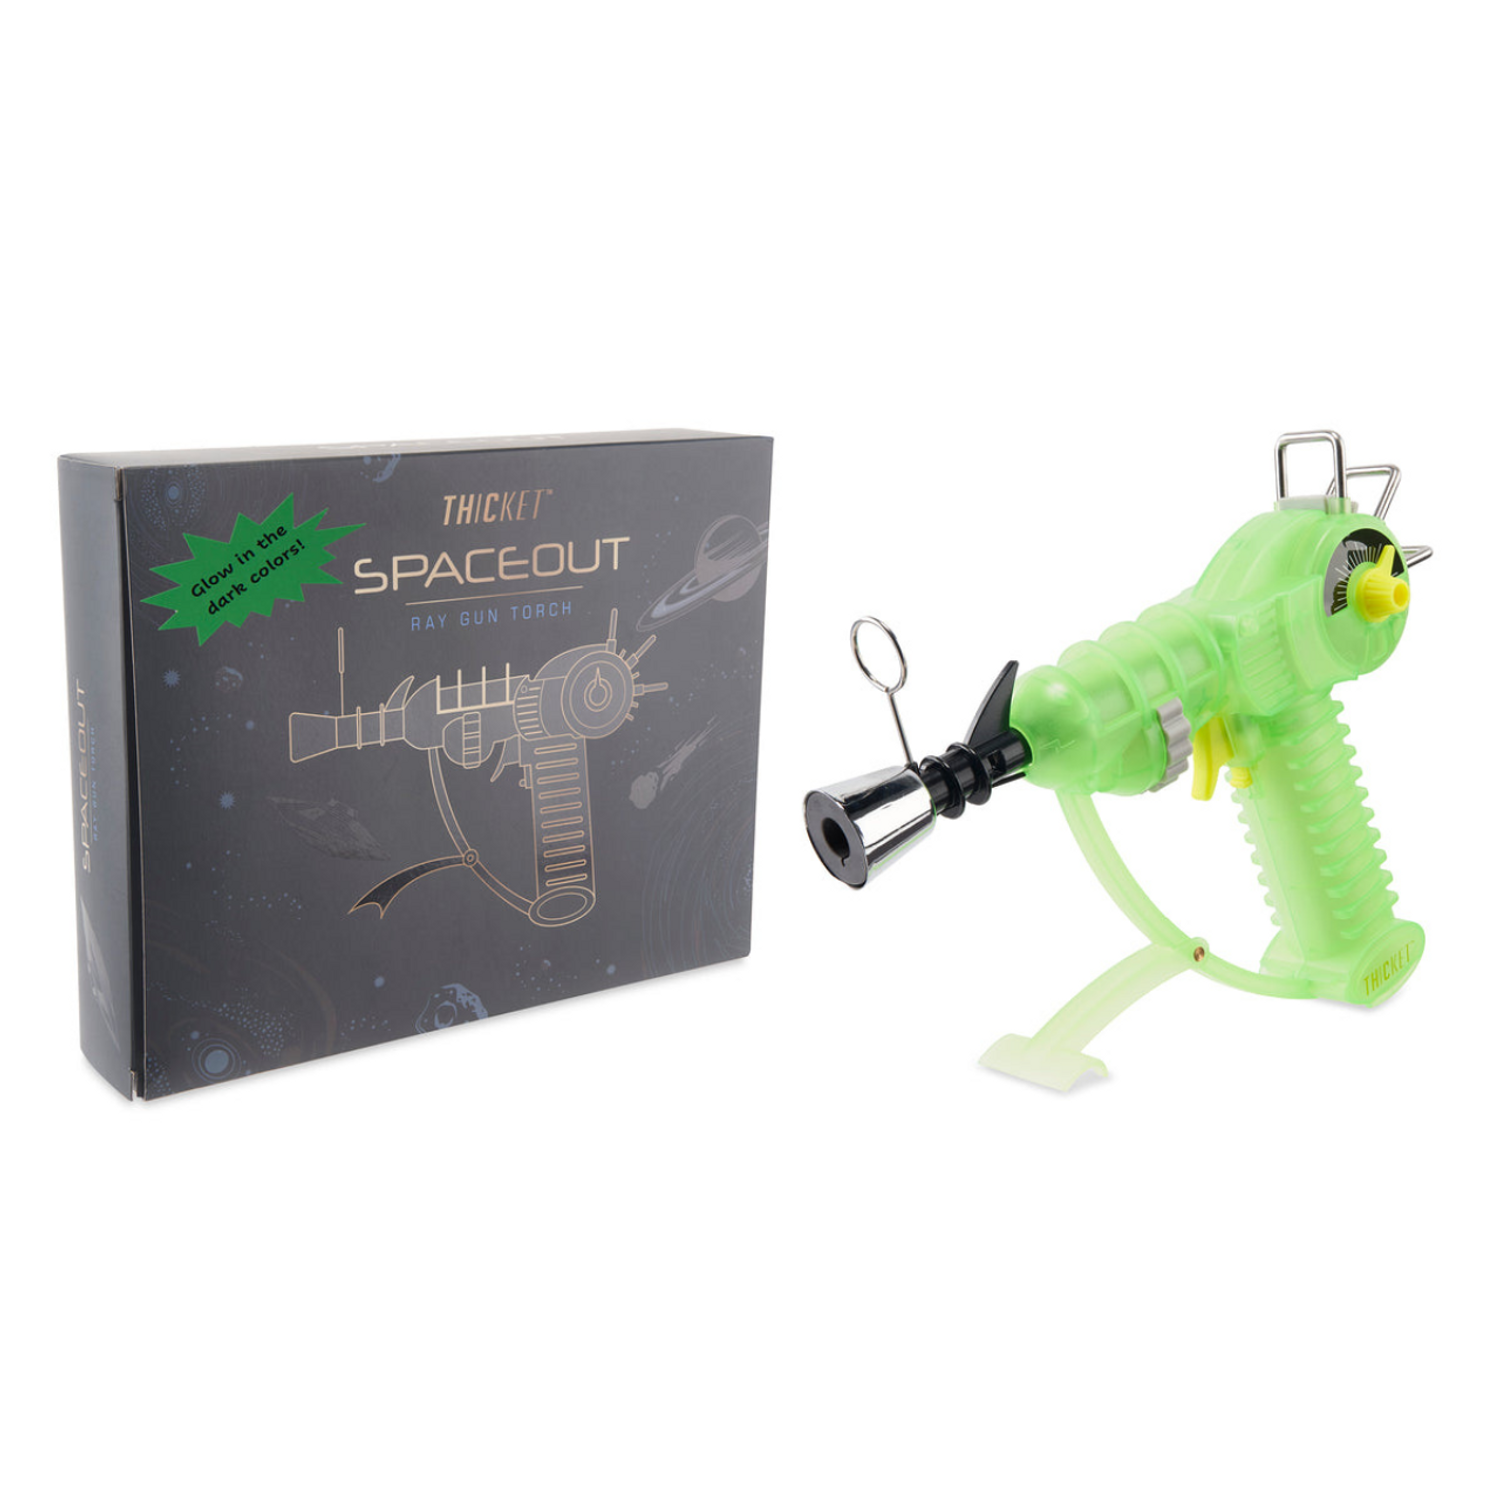 THICKET SPACEOUT GLOW IN THE DARK RAY GUN TORCH LIGHTER ASSORTED COLORS